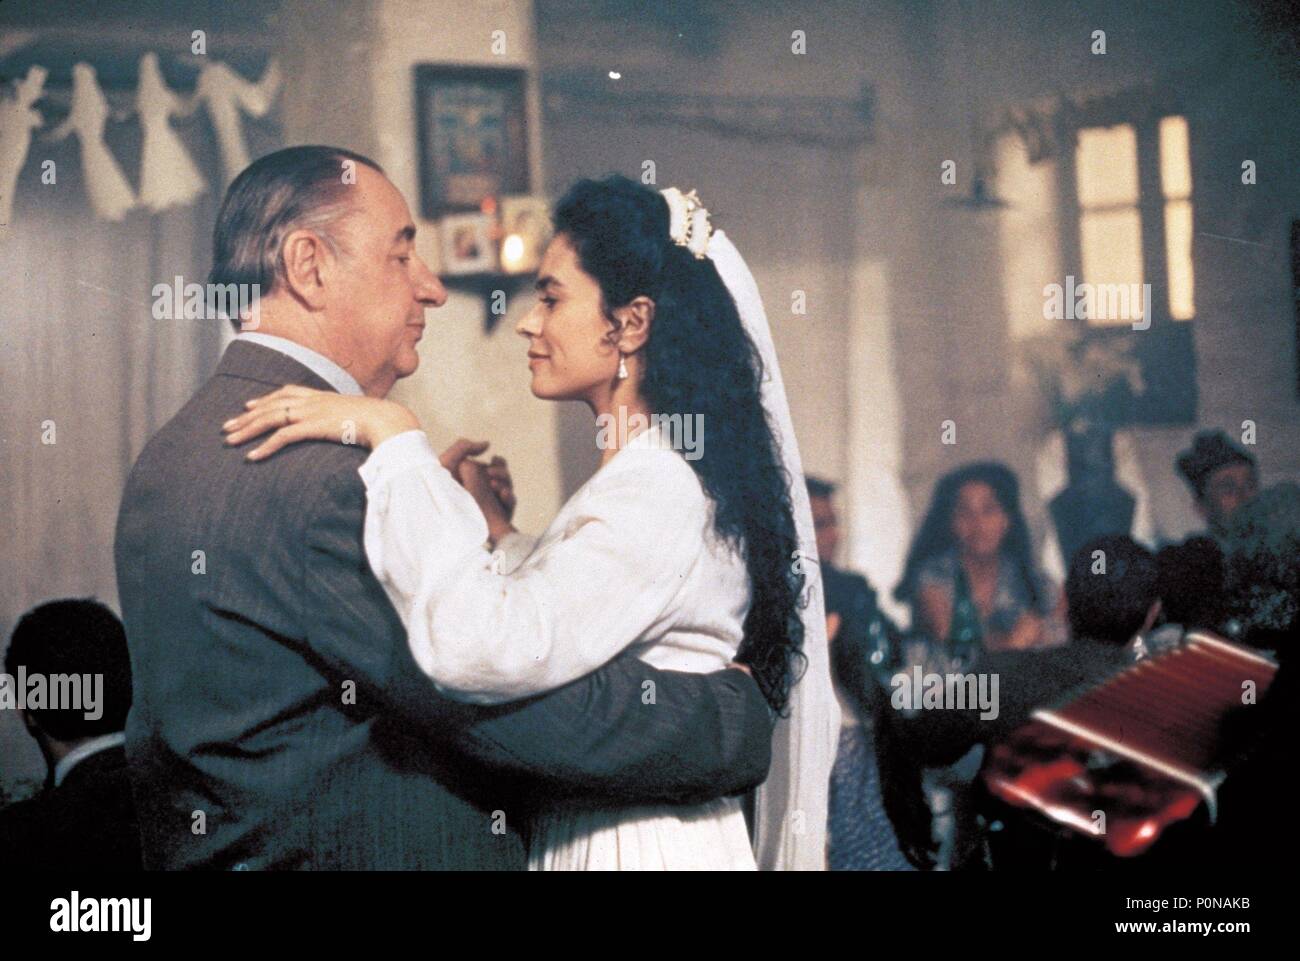 Original Film Title: IL POSTINO.  English Title: POSTMAN, THE.  Film Director: MICHAEL RADFORD.  Year: 1994.  Stars: PHILIPPE NOIRET; MARIA GRAZIA CUCINOTTA. Copyright: Editorial inside use only. This is a publicly distributed handout. Access rights only, no license of copyright provided. Mandatory authorization to Visual Icon (www.visual-icon.com) is required for the reproduction of this image. Credit: BUENA VISTA / Album Stock Photo